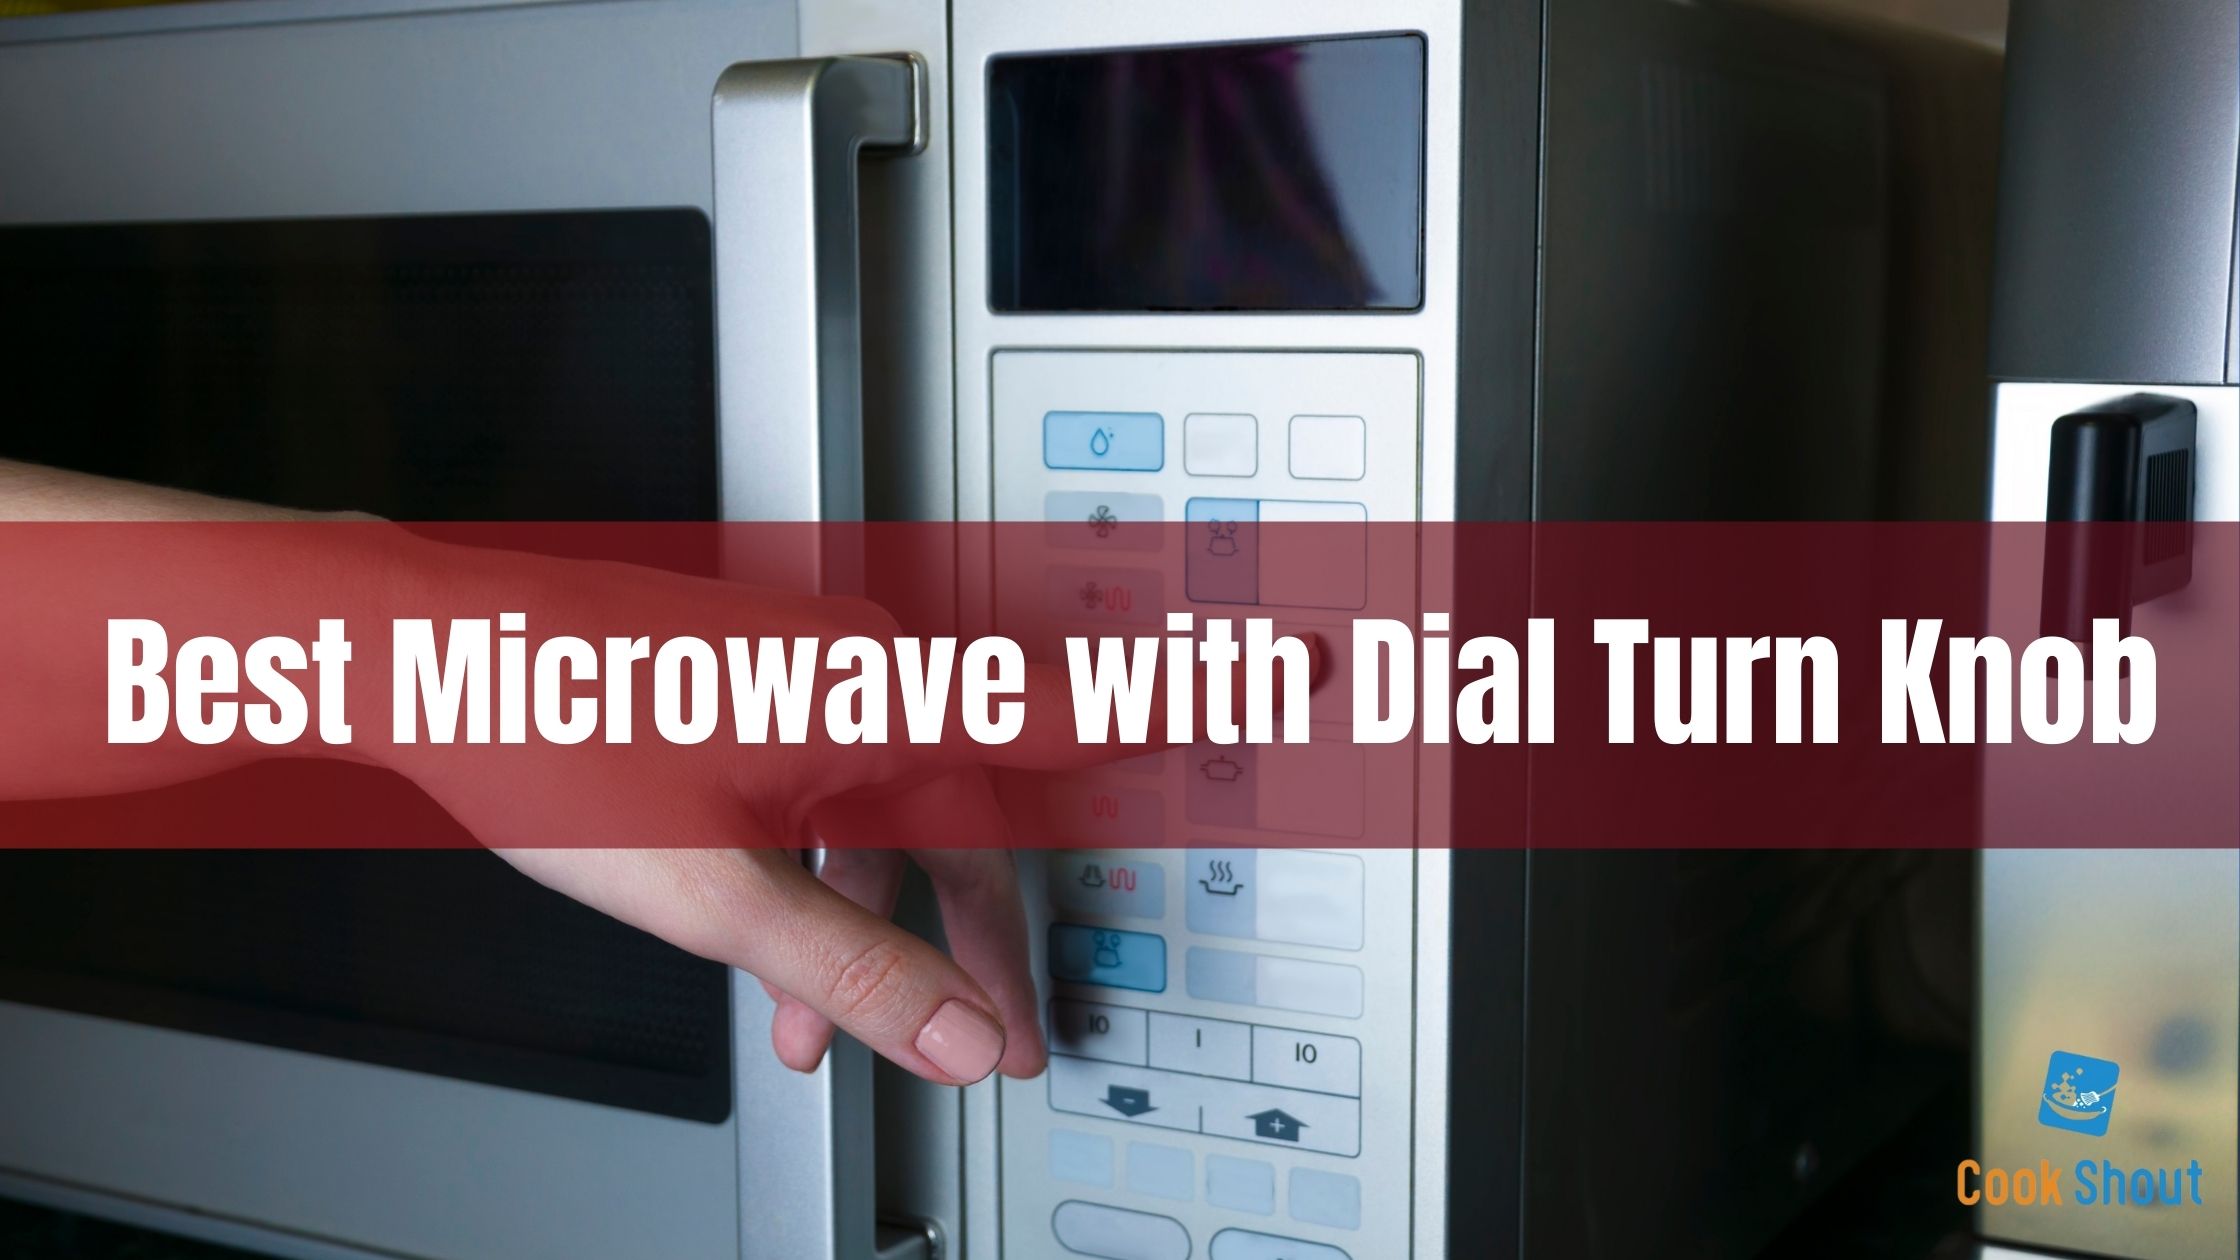 Best Microwave with Dial Turn Knob